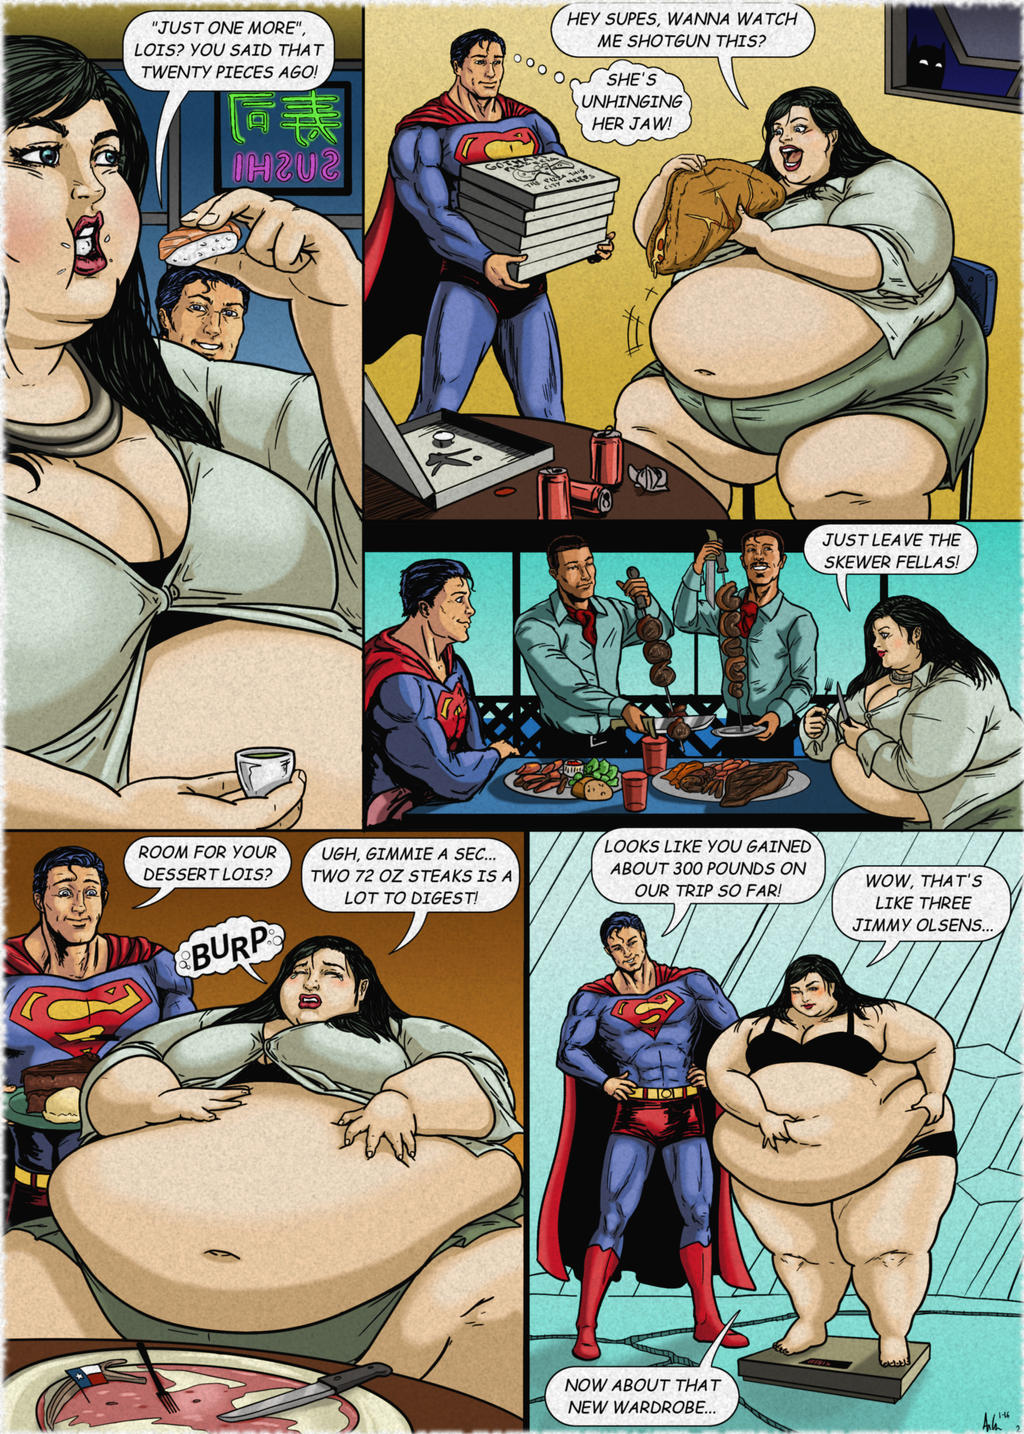 Lois Lane: The World is Your Buffet! pg2 by Ray-Norr